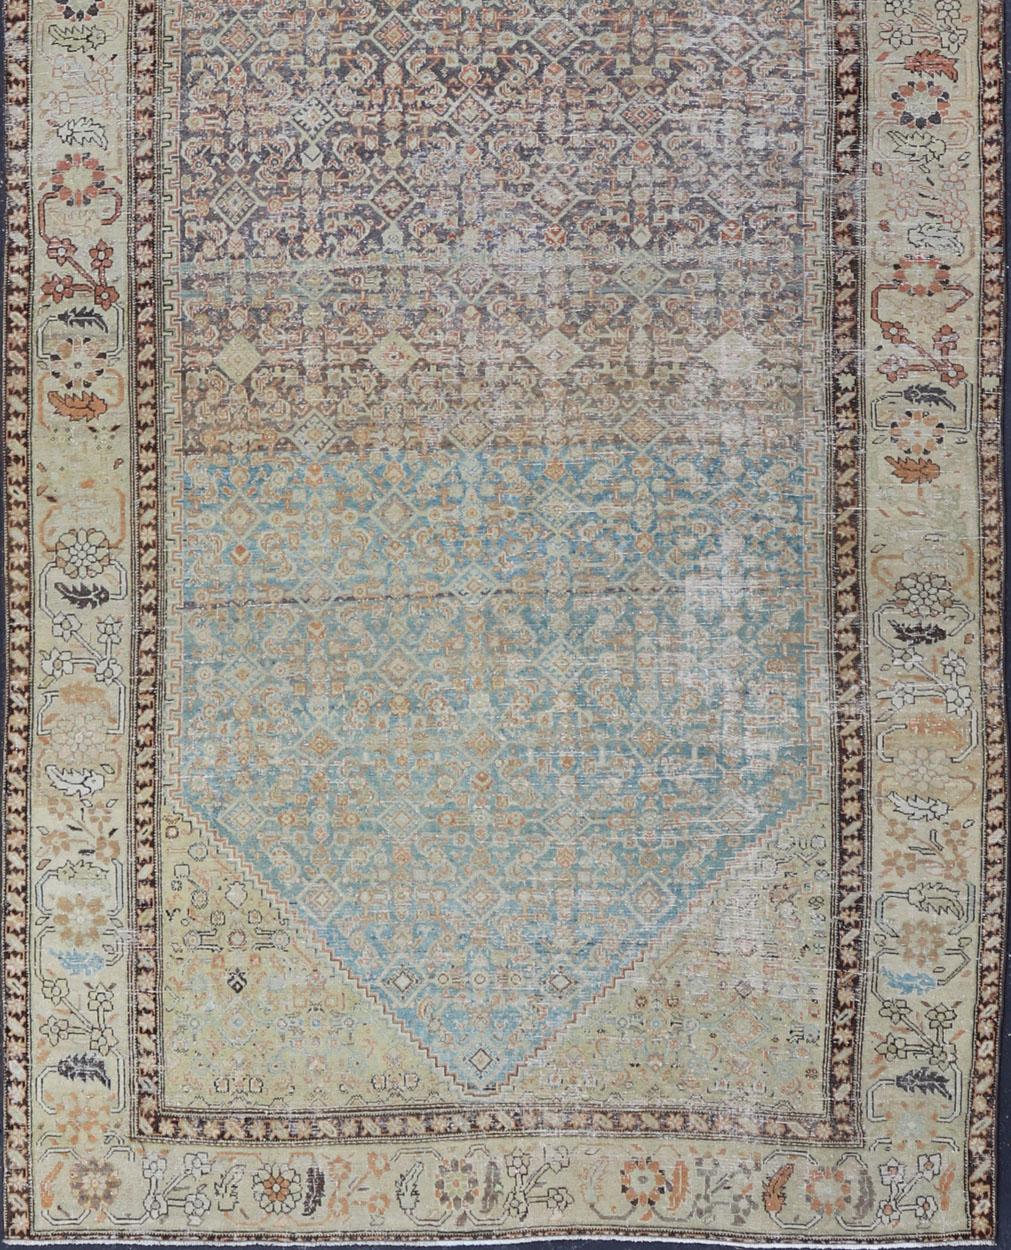 This antique Malayer is a beautiful piece displays a large medallion in the field, filled and surrounded by many motifs, accentuating the incredible detail in this piece. The wide border is banded by a floral motif design, wrapping around the entire